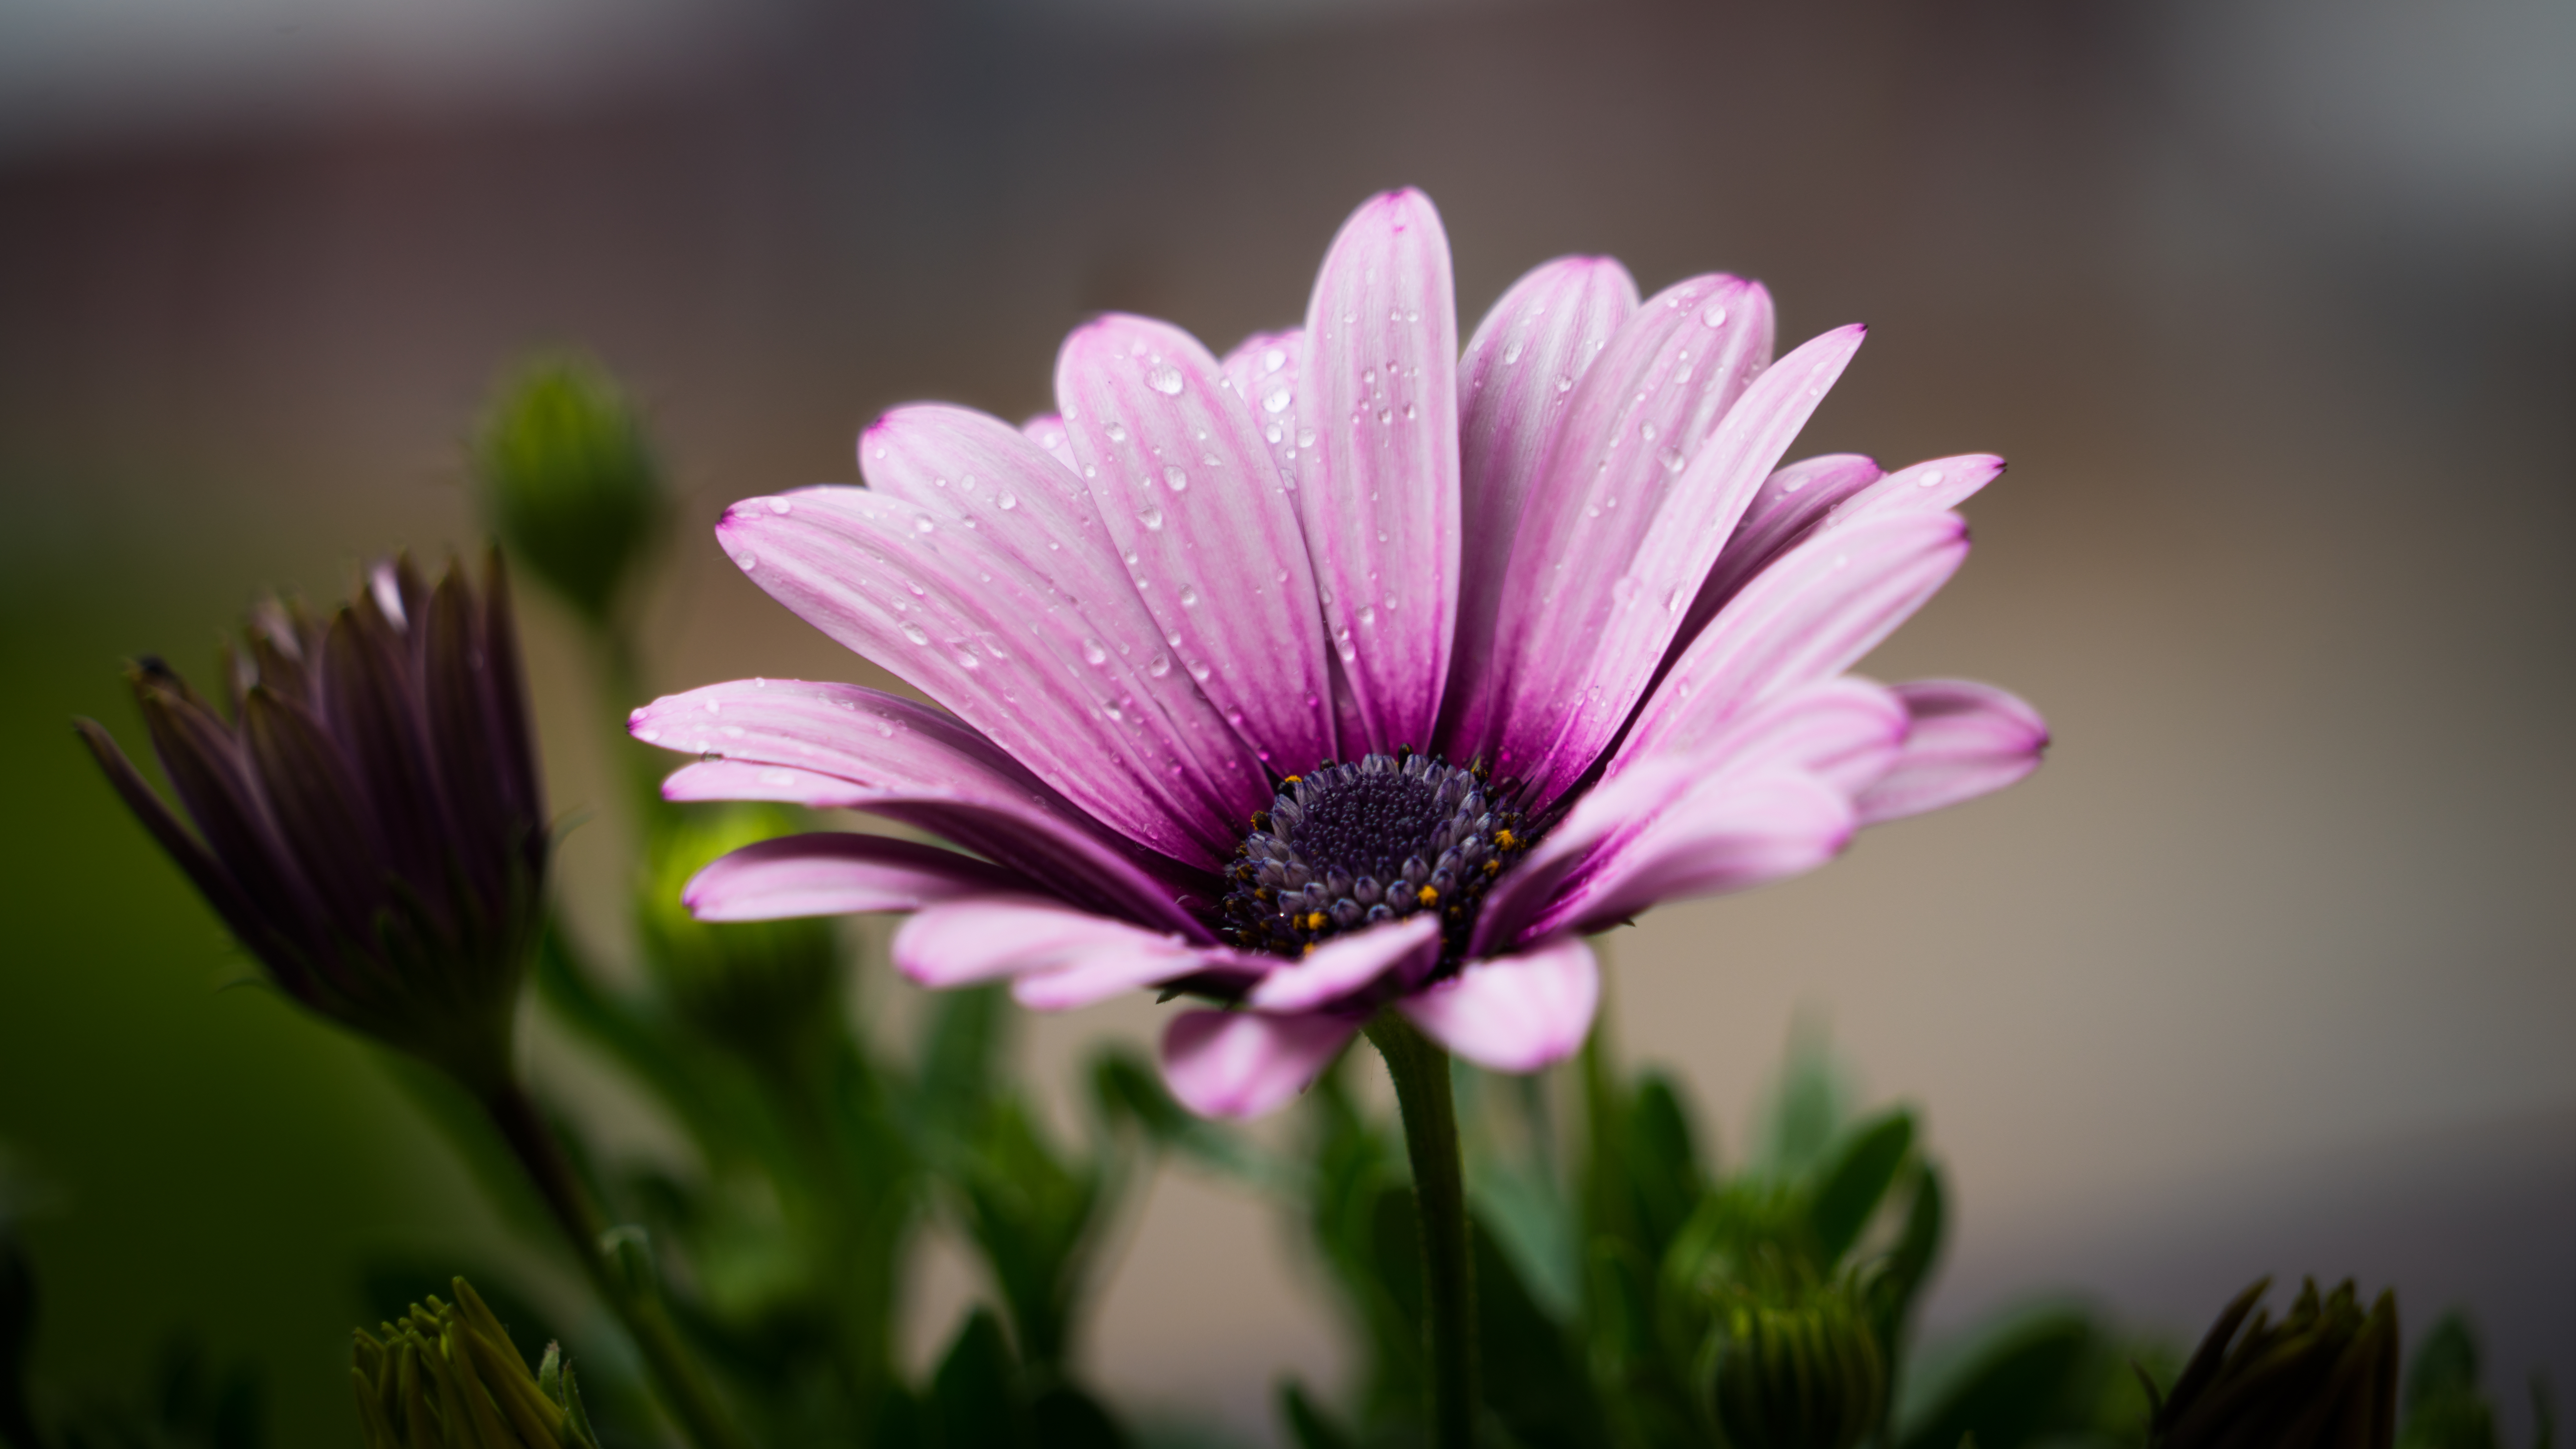 Images of Flower | 7518x4229